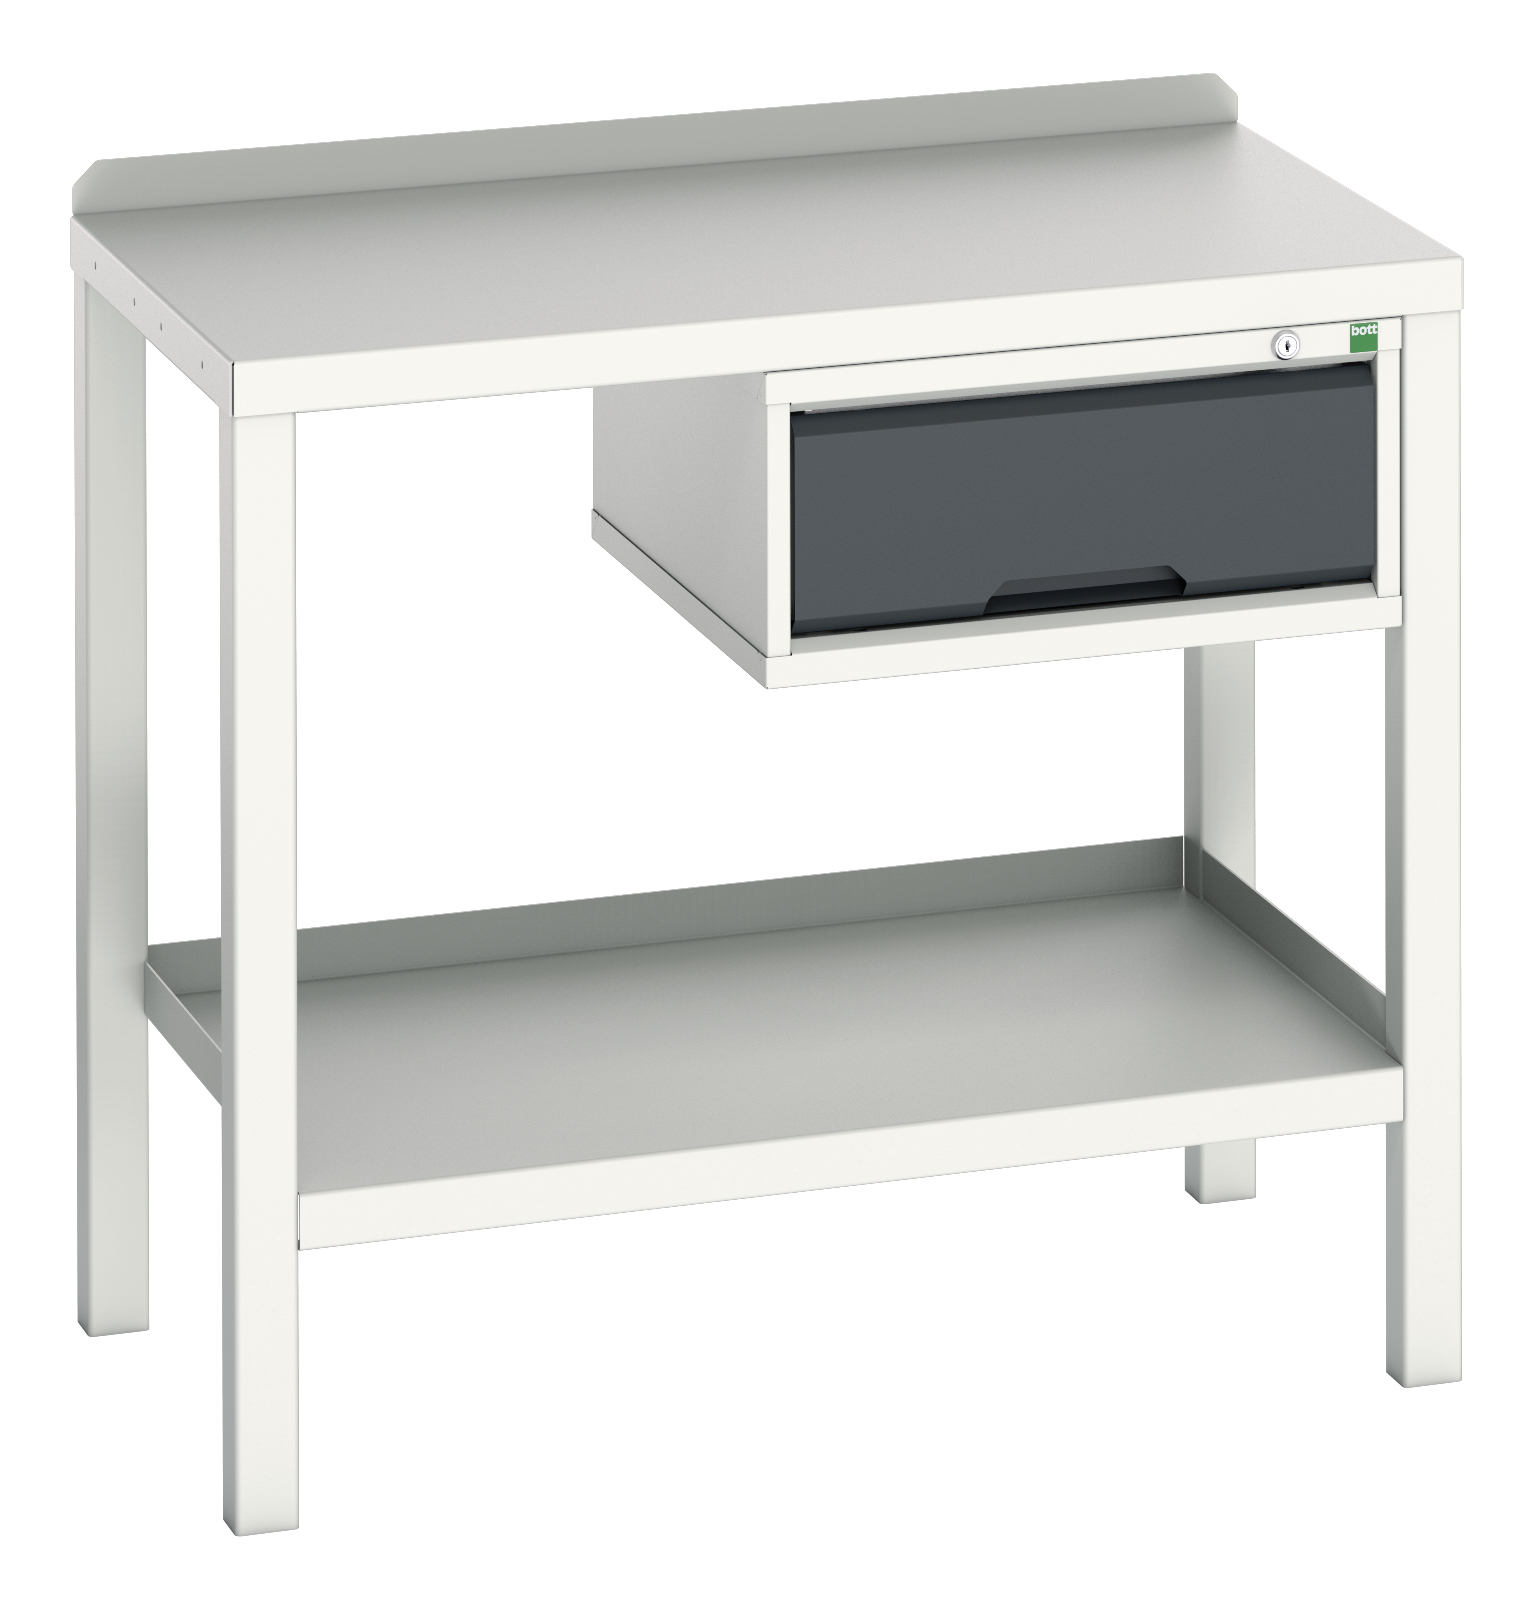 Bott Verso Welded Bench With 1 Drawer Cabinet - 16922600.19